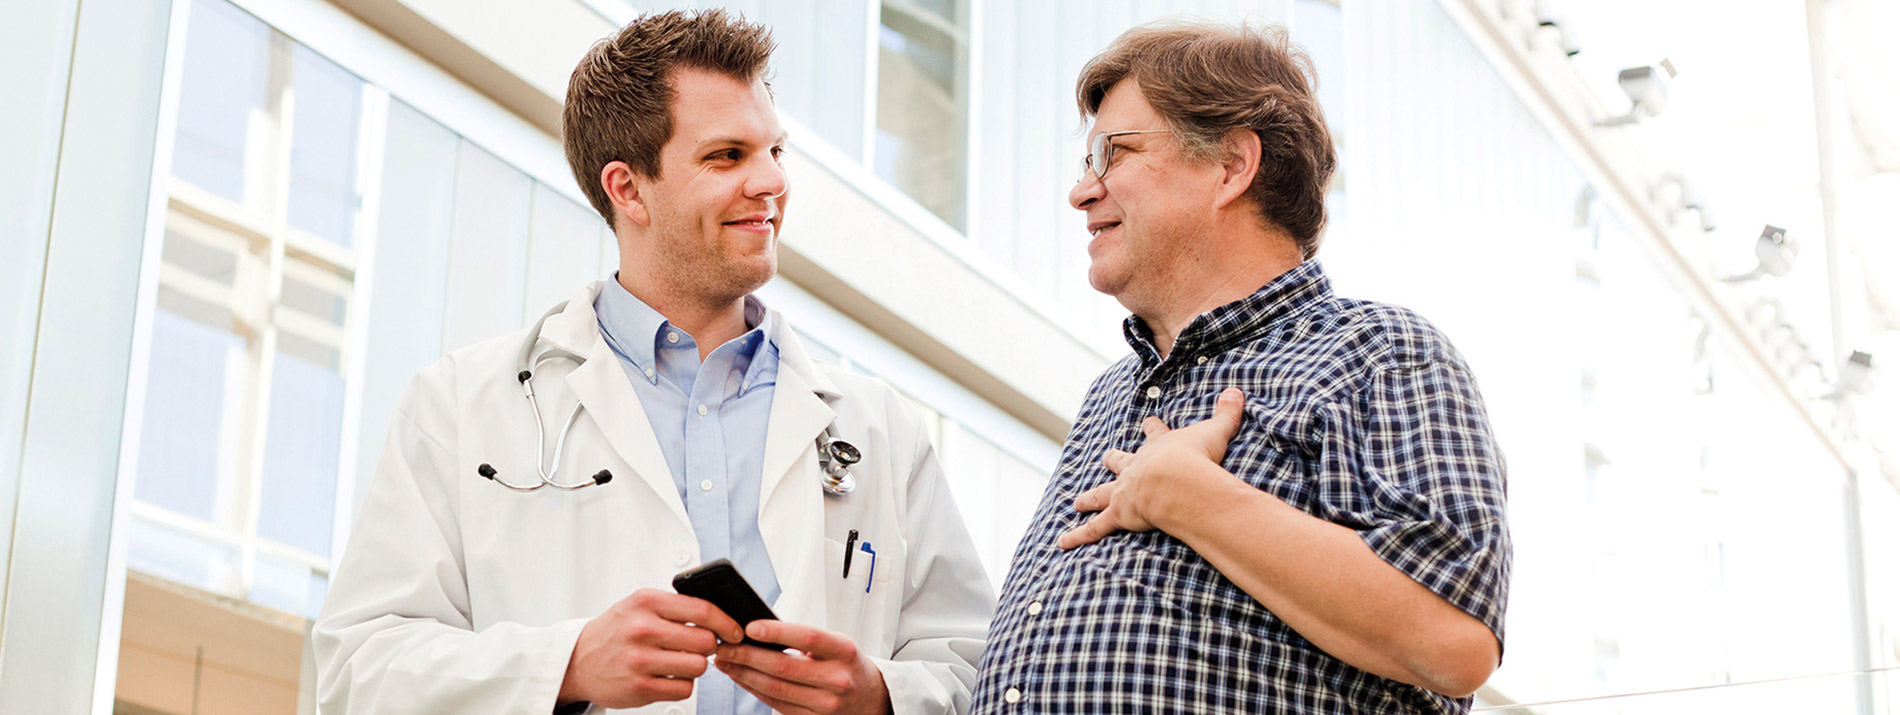 A male doctor smiling and talking with a patient.